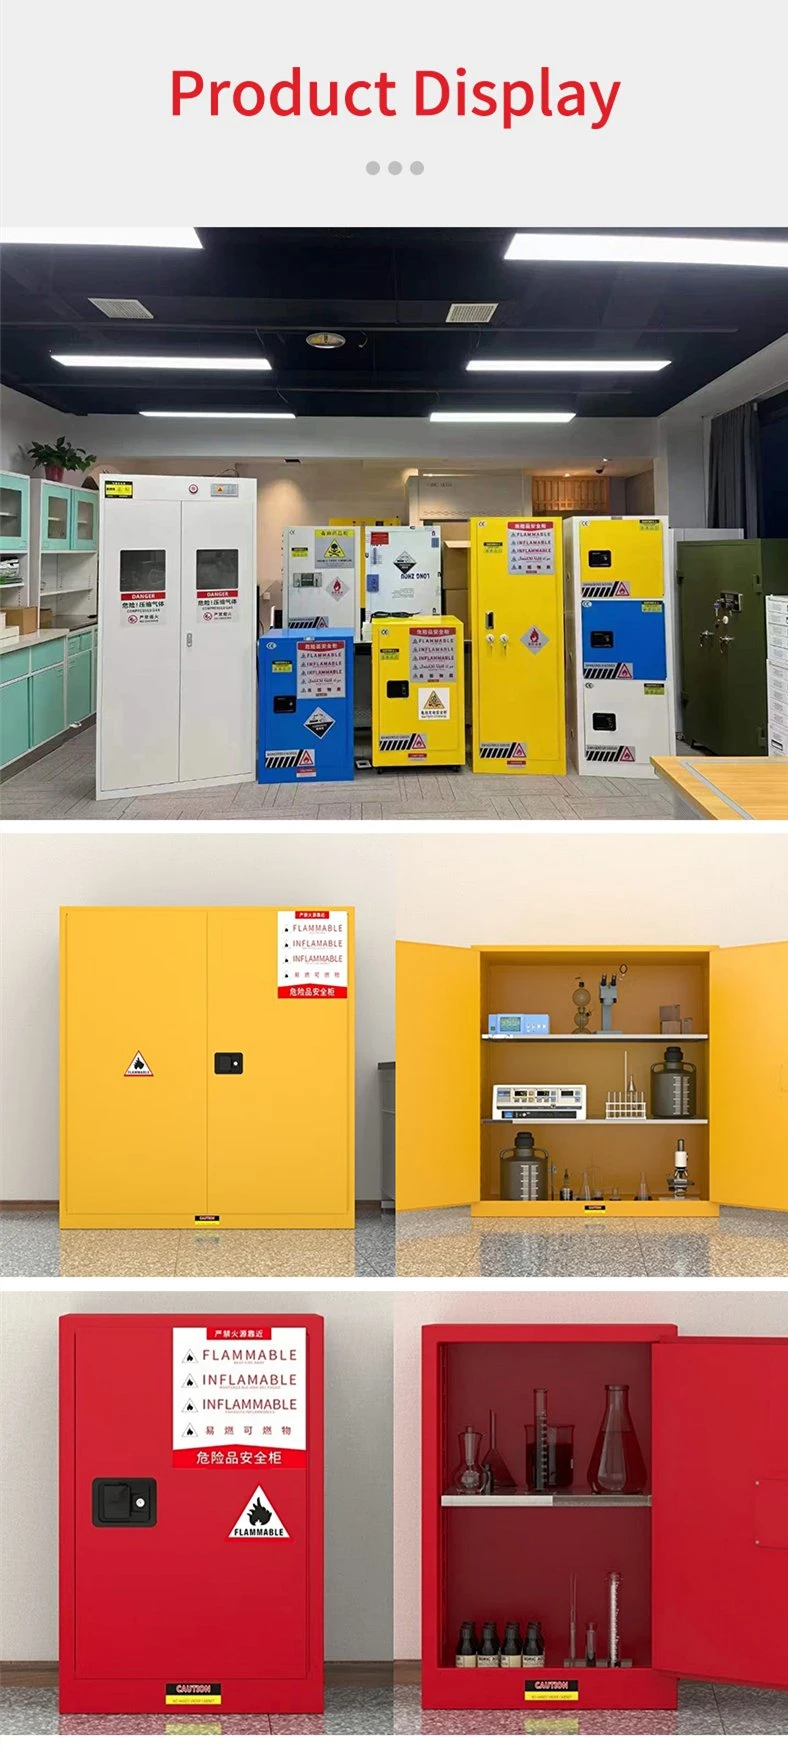 2 Door Flammable Liquid Chemical Safety Storage Cabinet